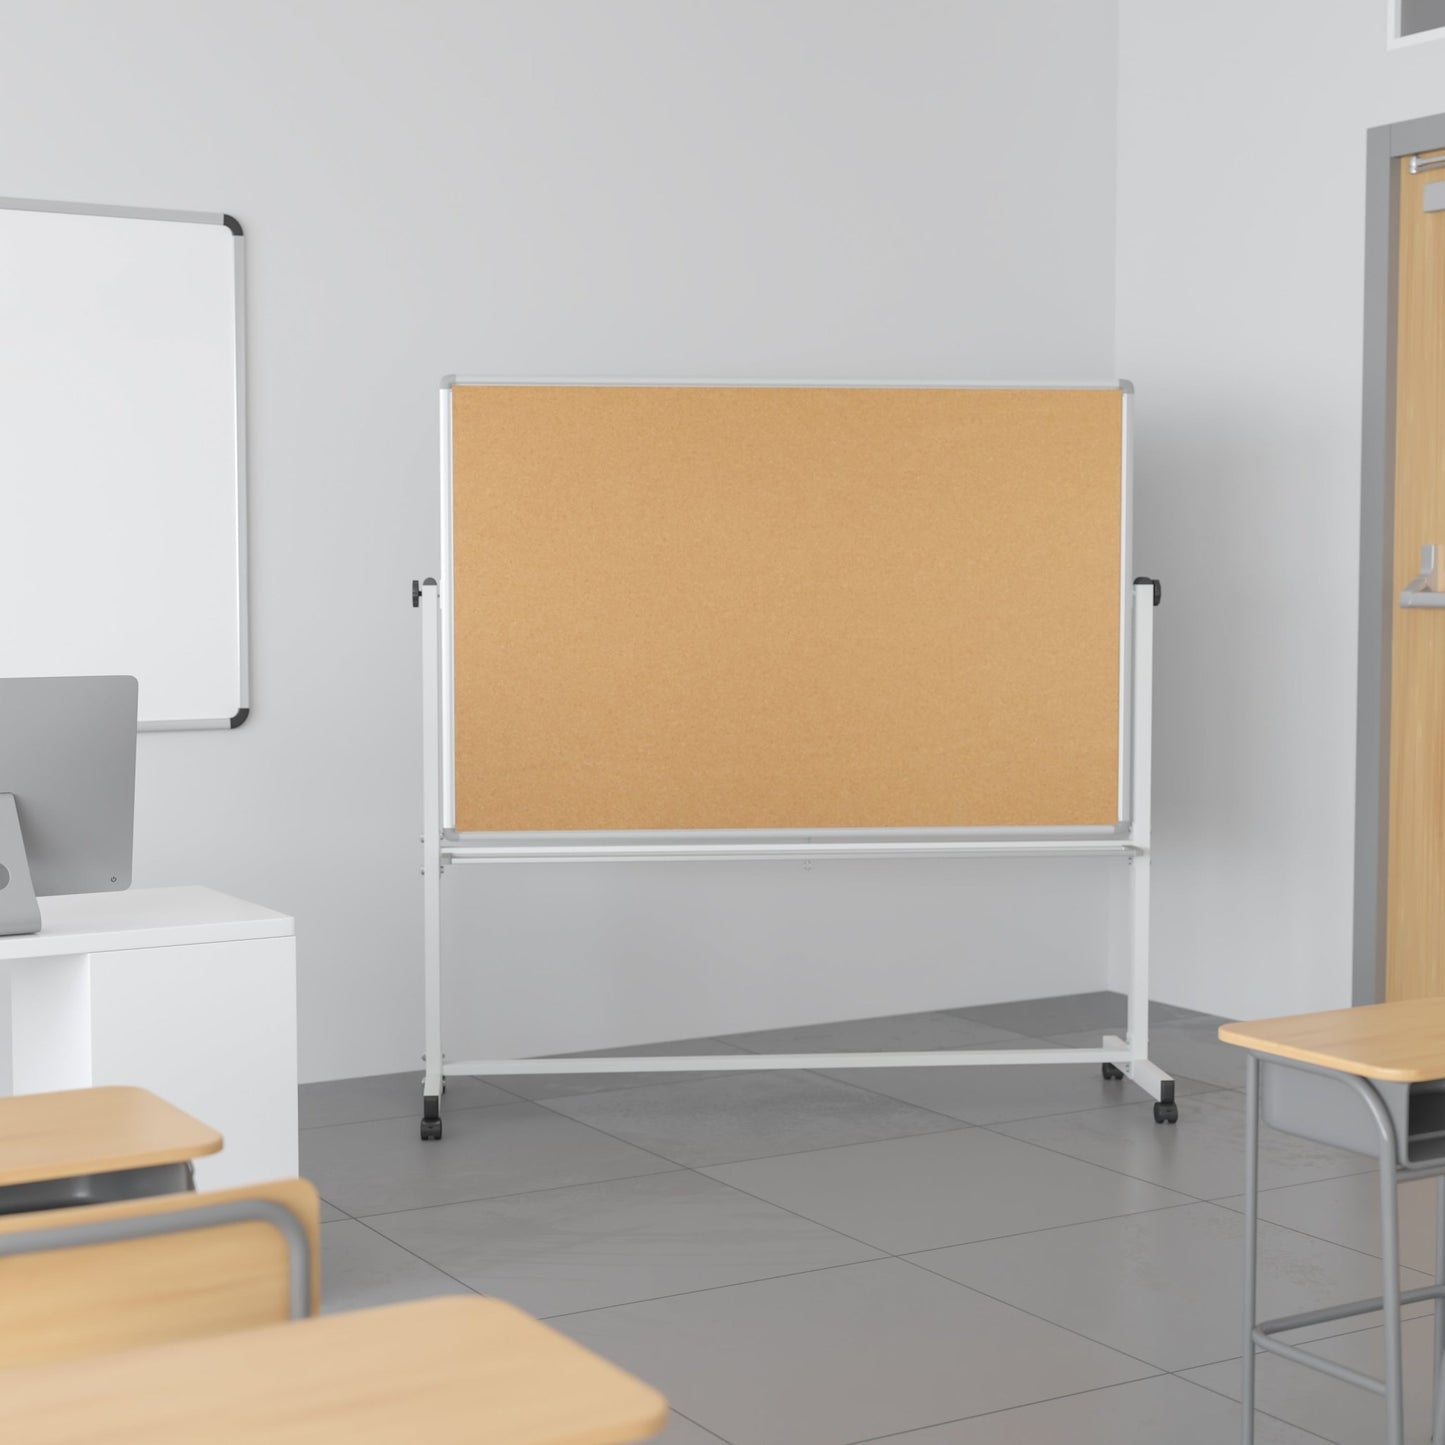 HERCULES Series 62.5"W x 62.25"H Reversible Mobile Cork Bulletin Board and White Board with Pen Tray - SchoolOutlet